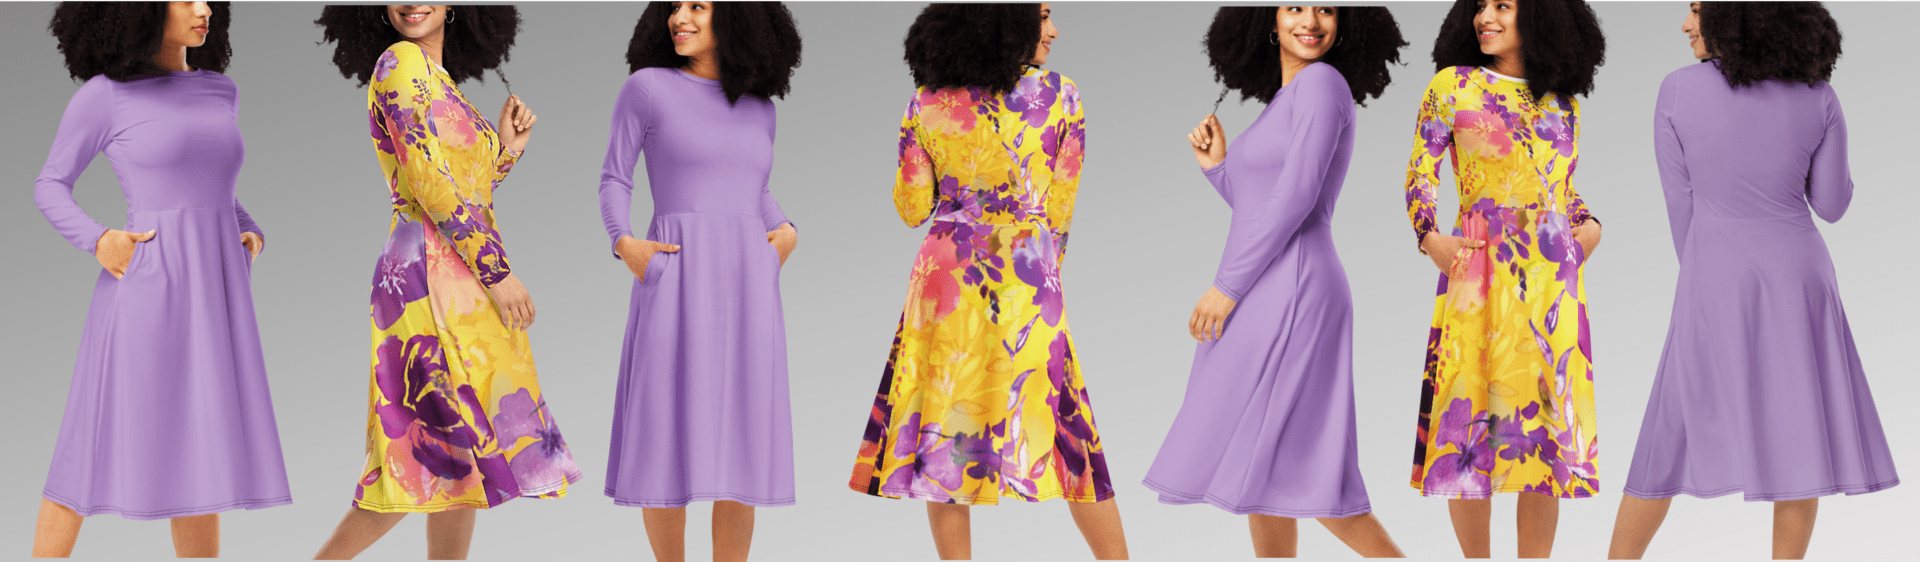 Women modeling purple and floral dresses.